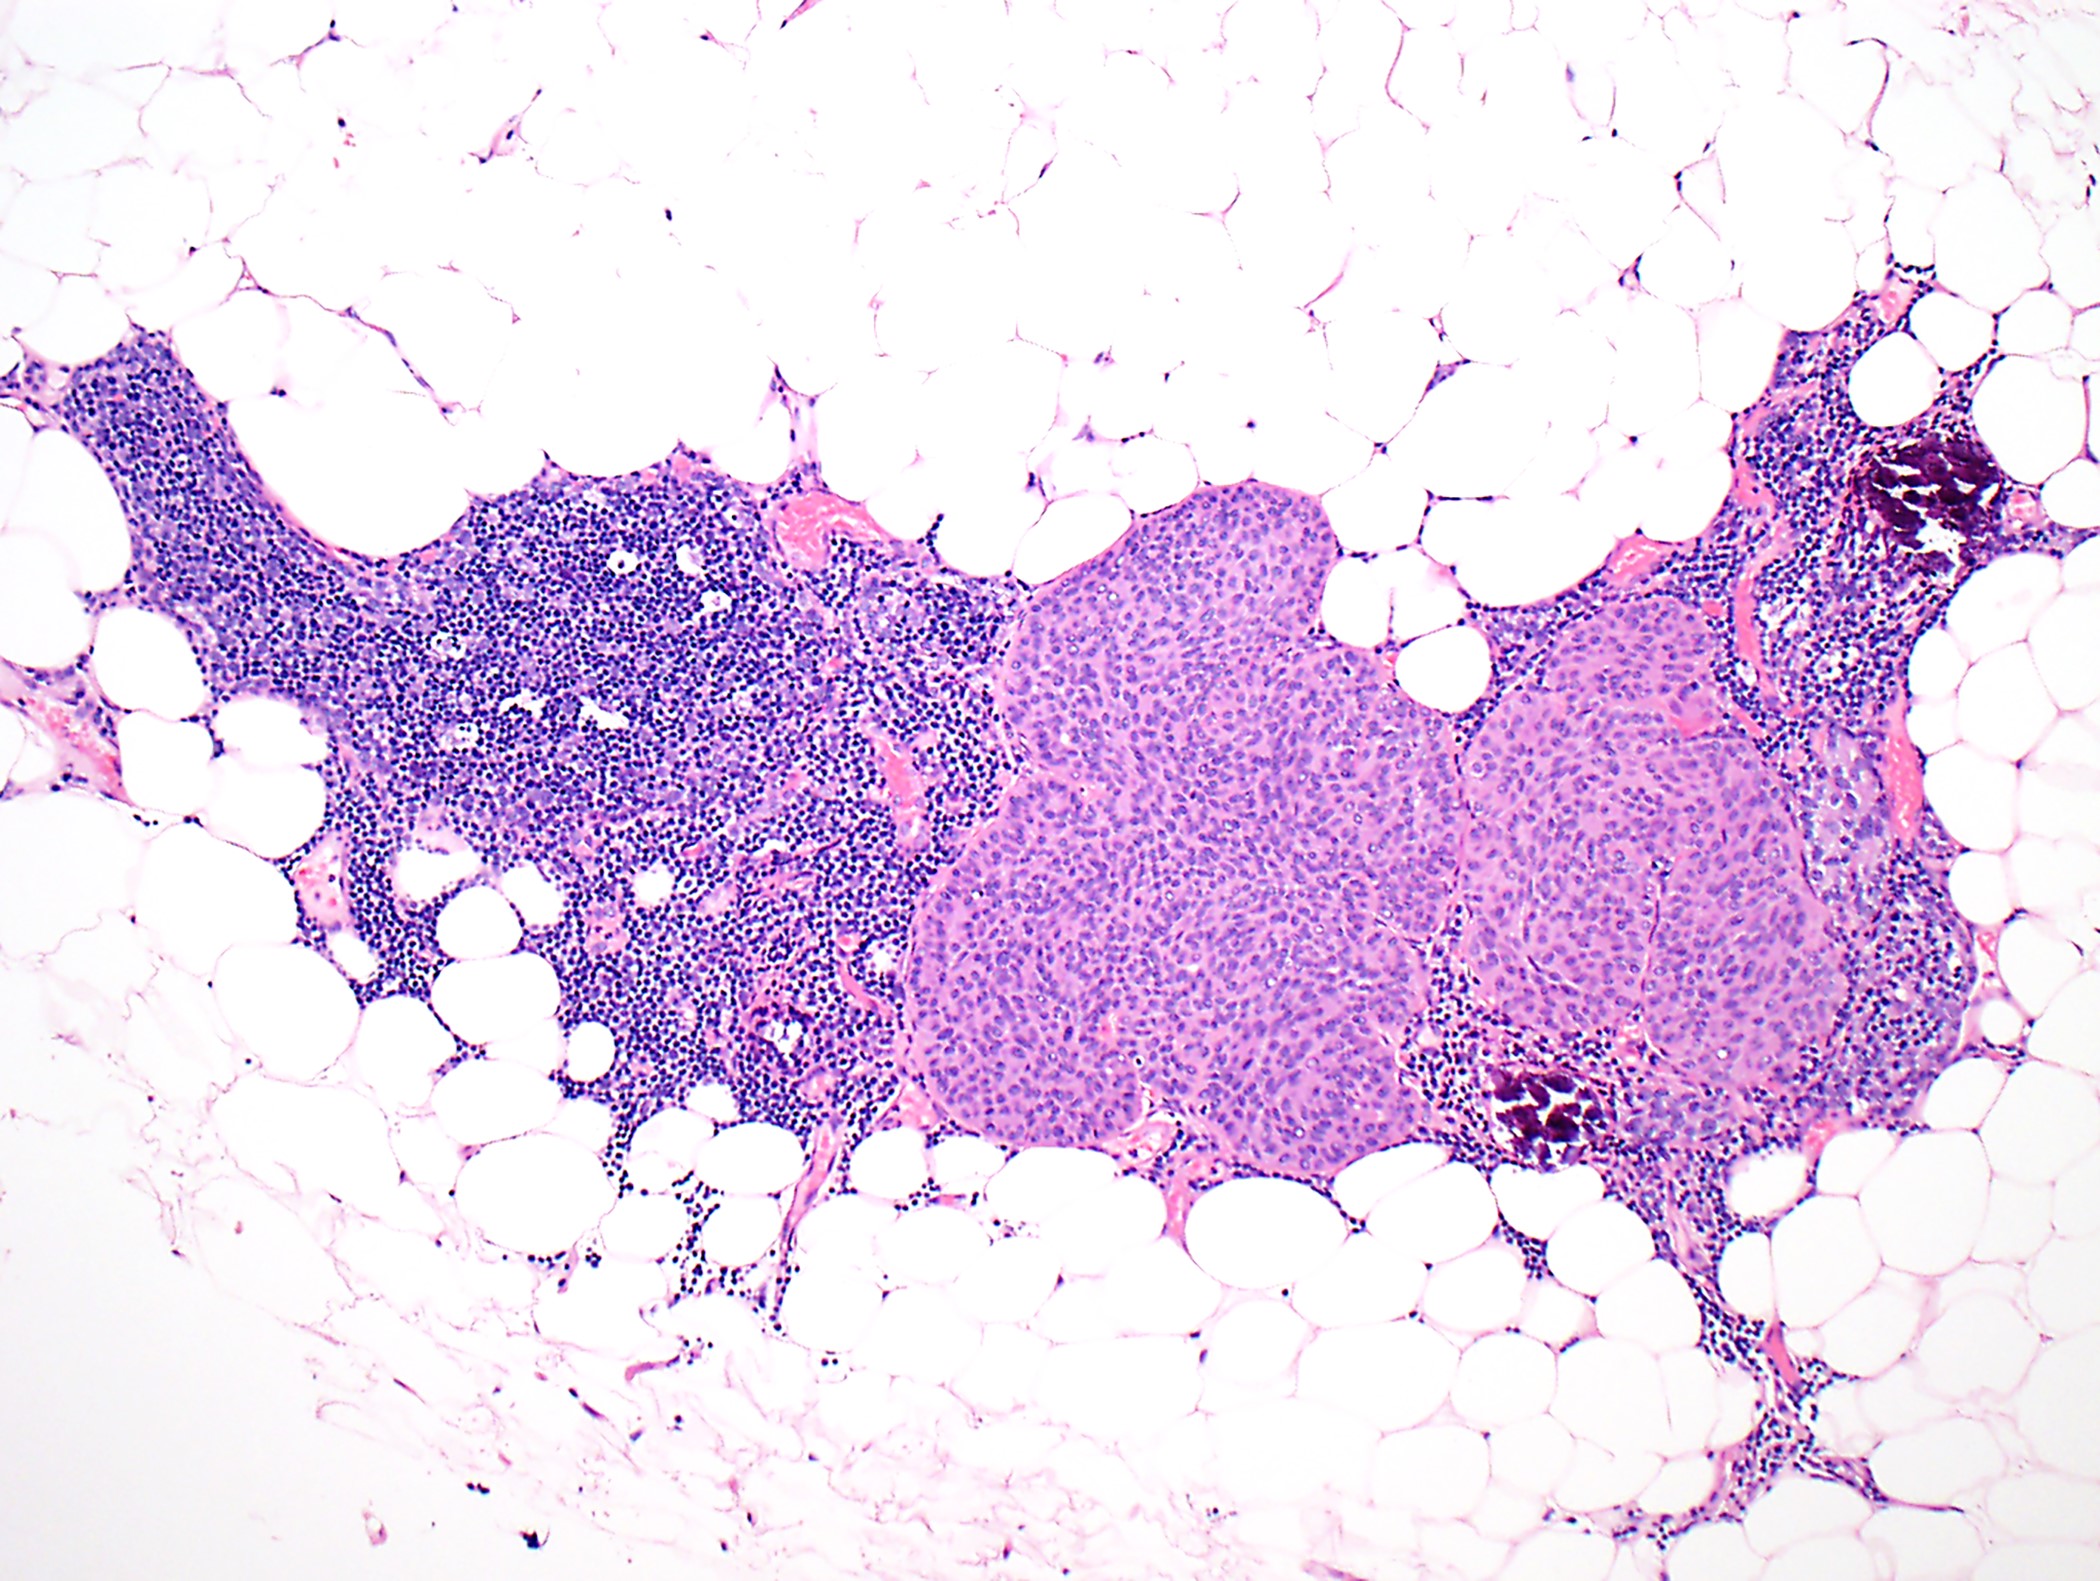 Small thymic epithelial cell nest